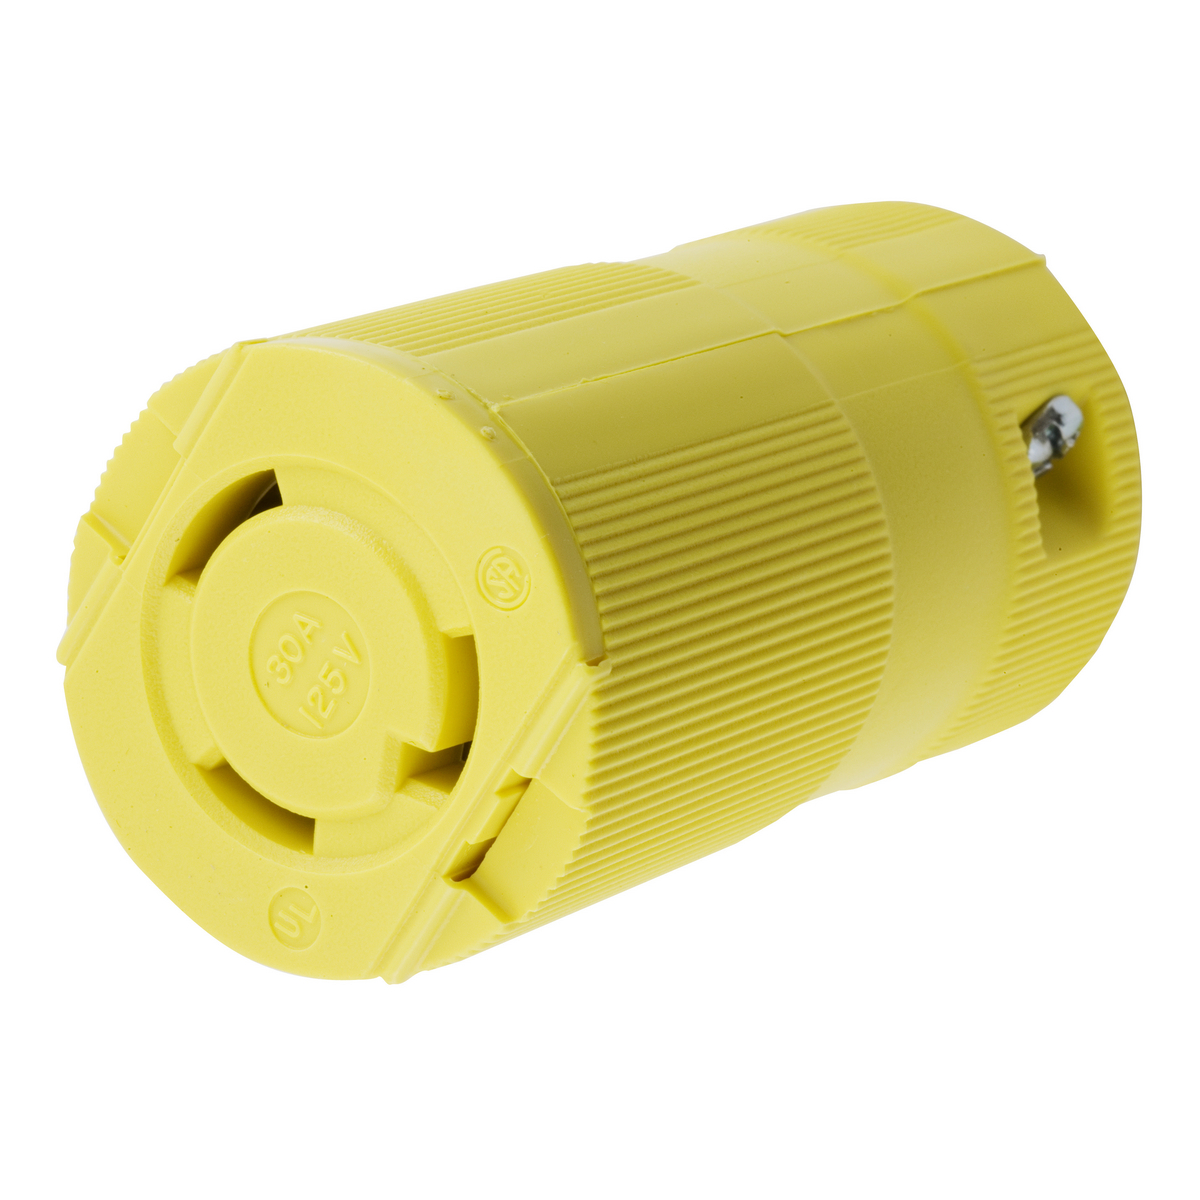 Locking Devices, Twist-Lock®, Valise, Female Connector Body, 30A 125V,  2-Pole 3-Wire Grounding, L5-30R, Screw Terminal, Yellow, HBL2613VY